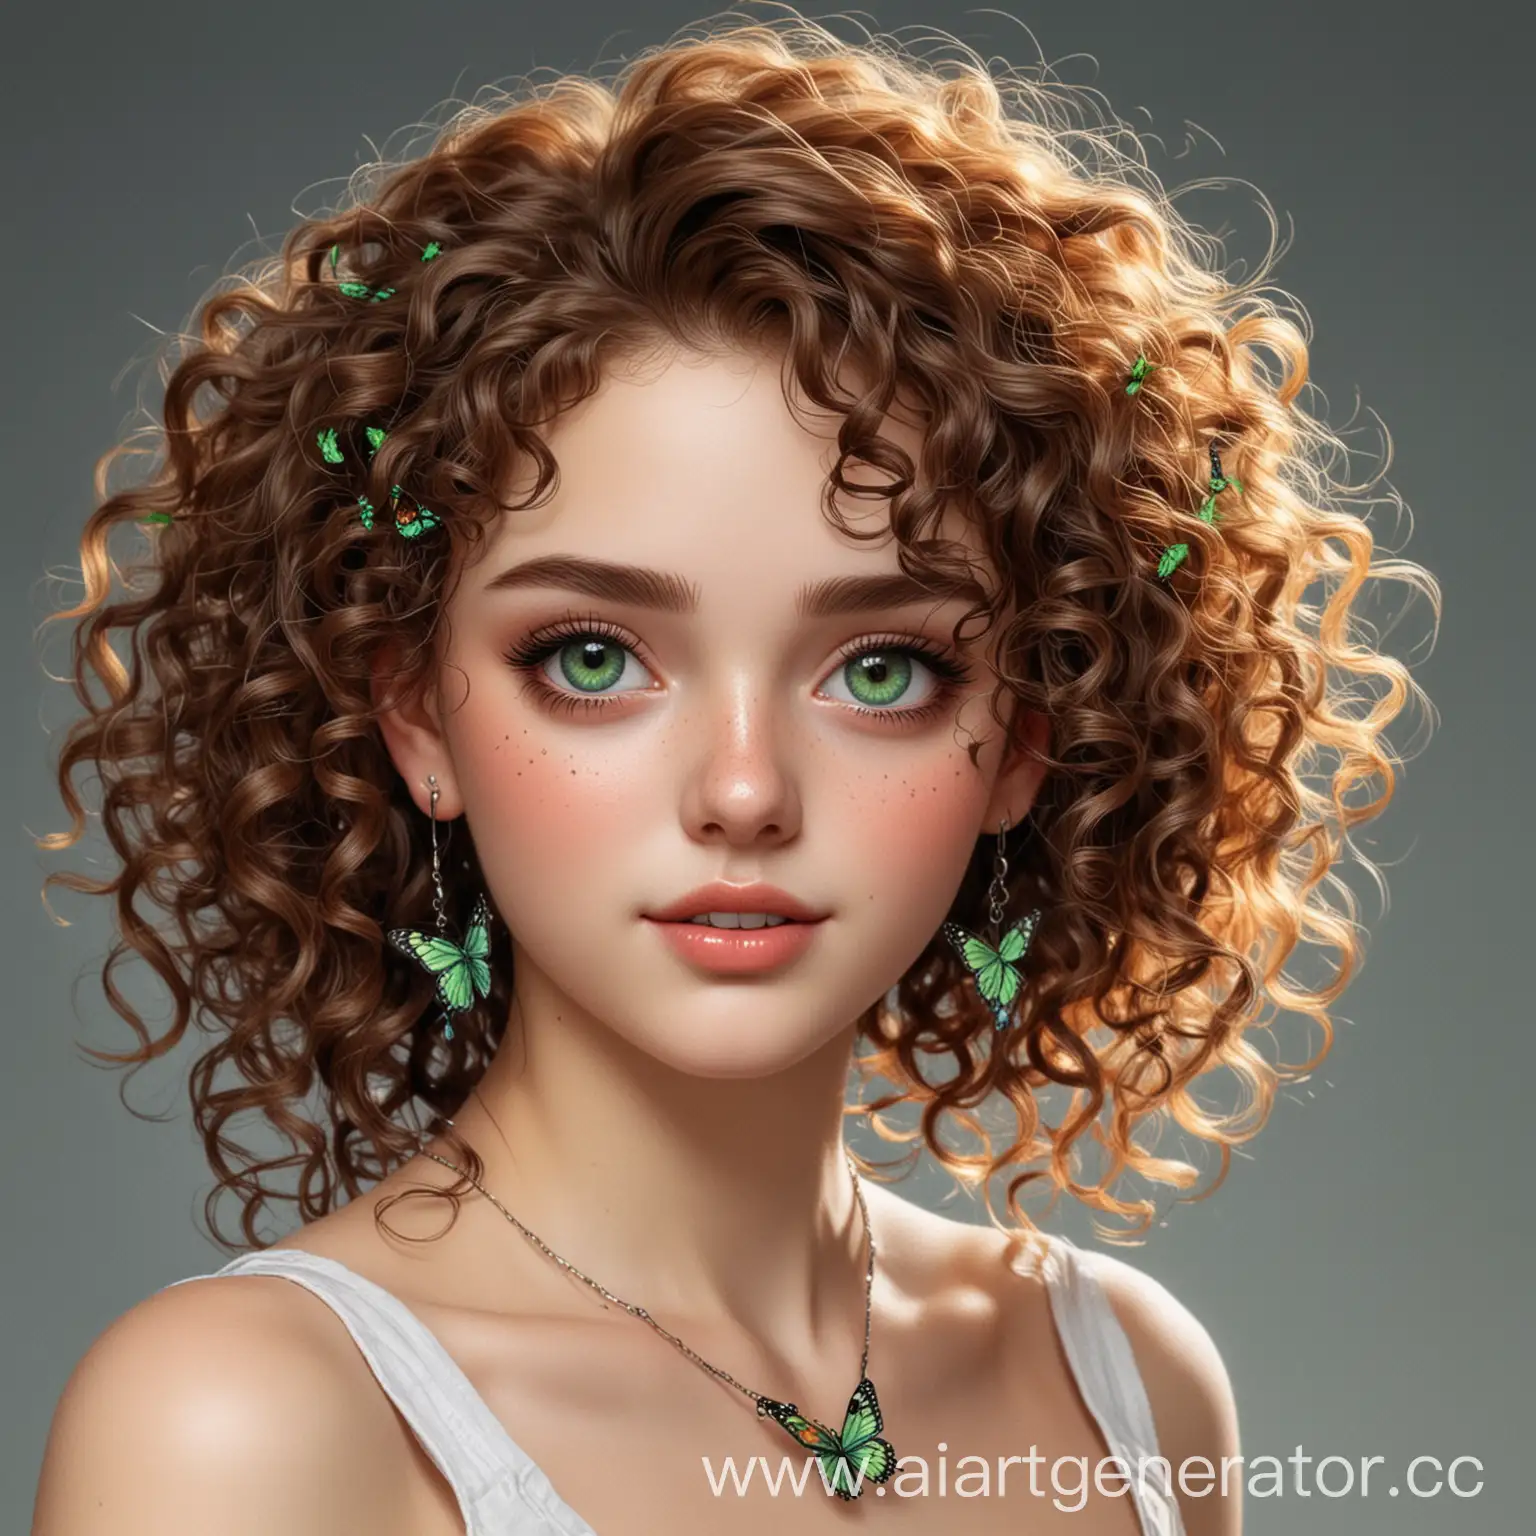 CurlyHaired-Girl-with-Butterfly-Earrings-and-Green-Eyes